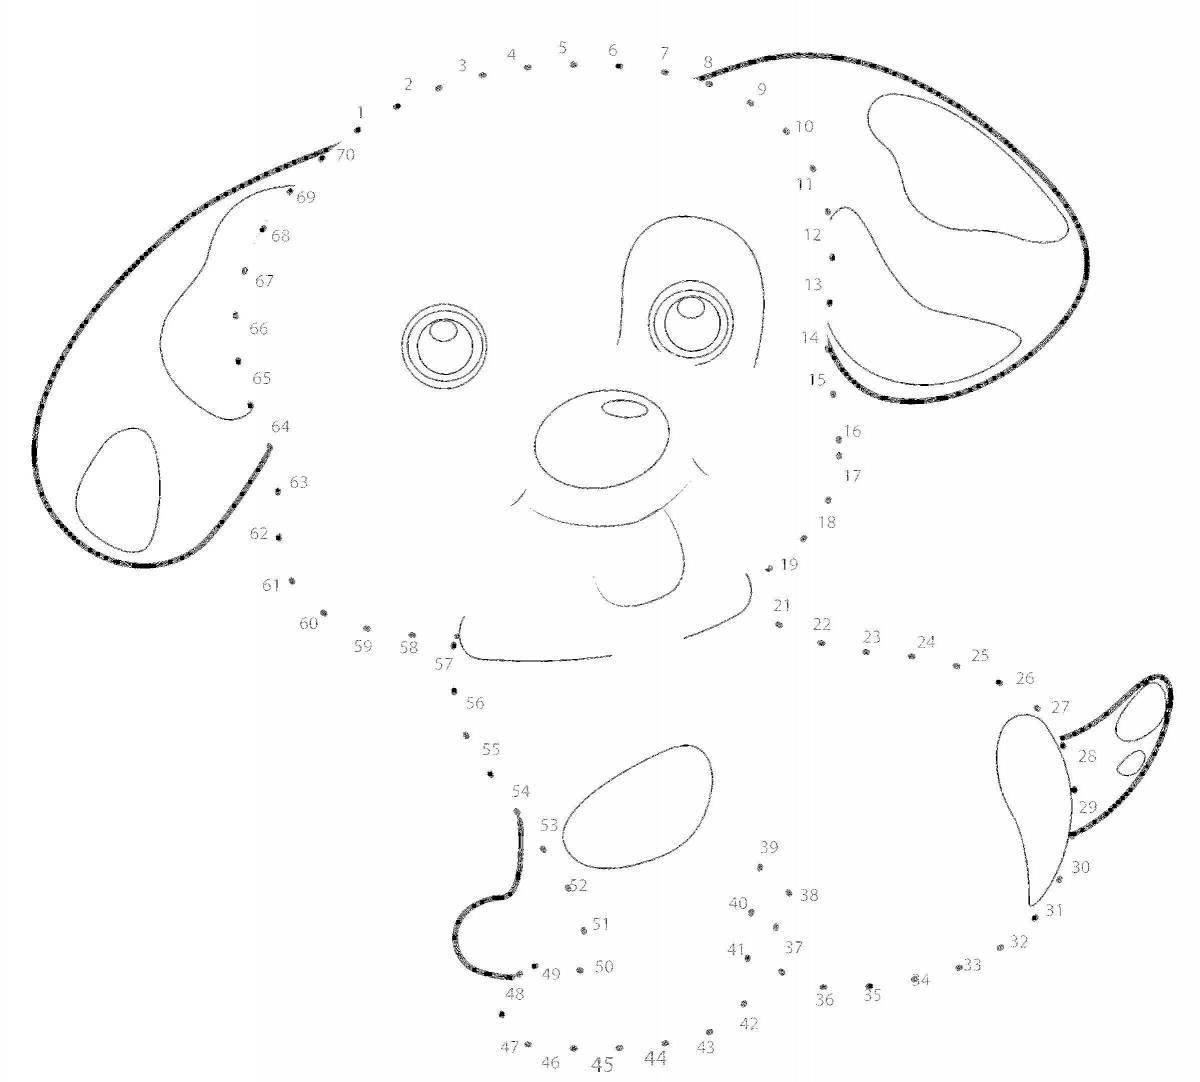 Coloring pages with colored dots for kids